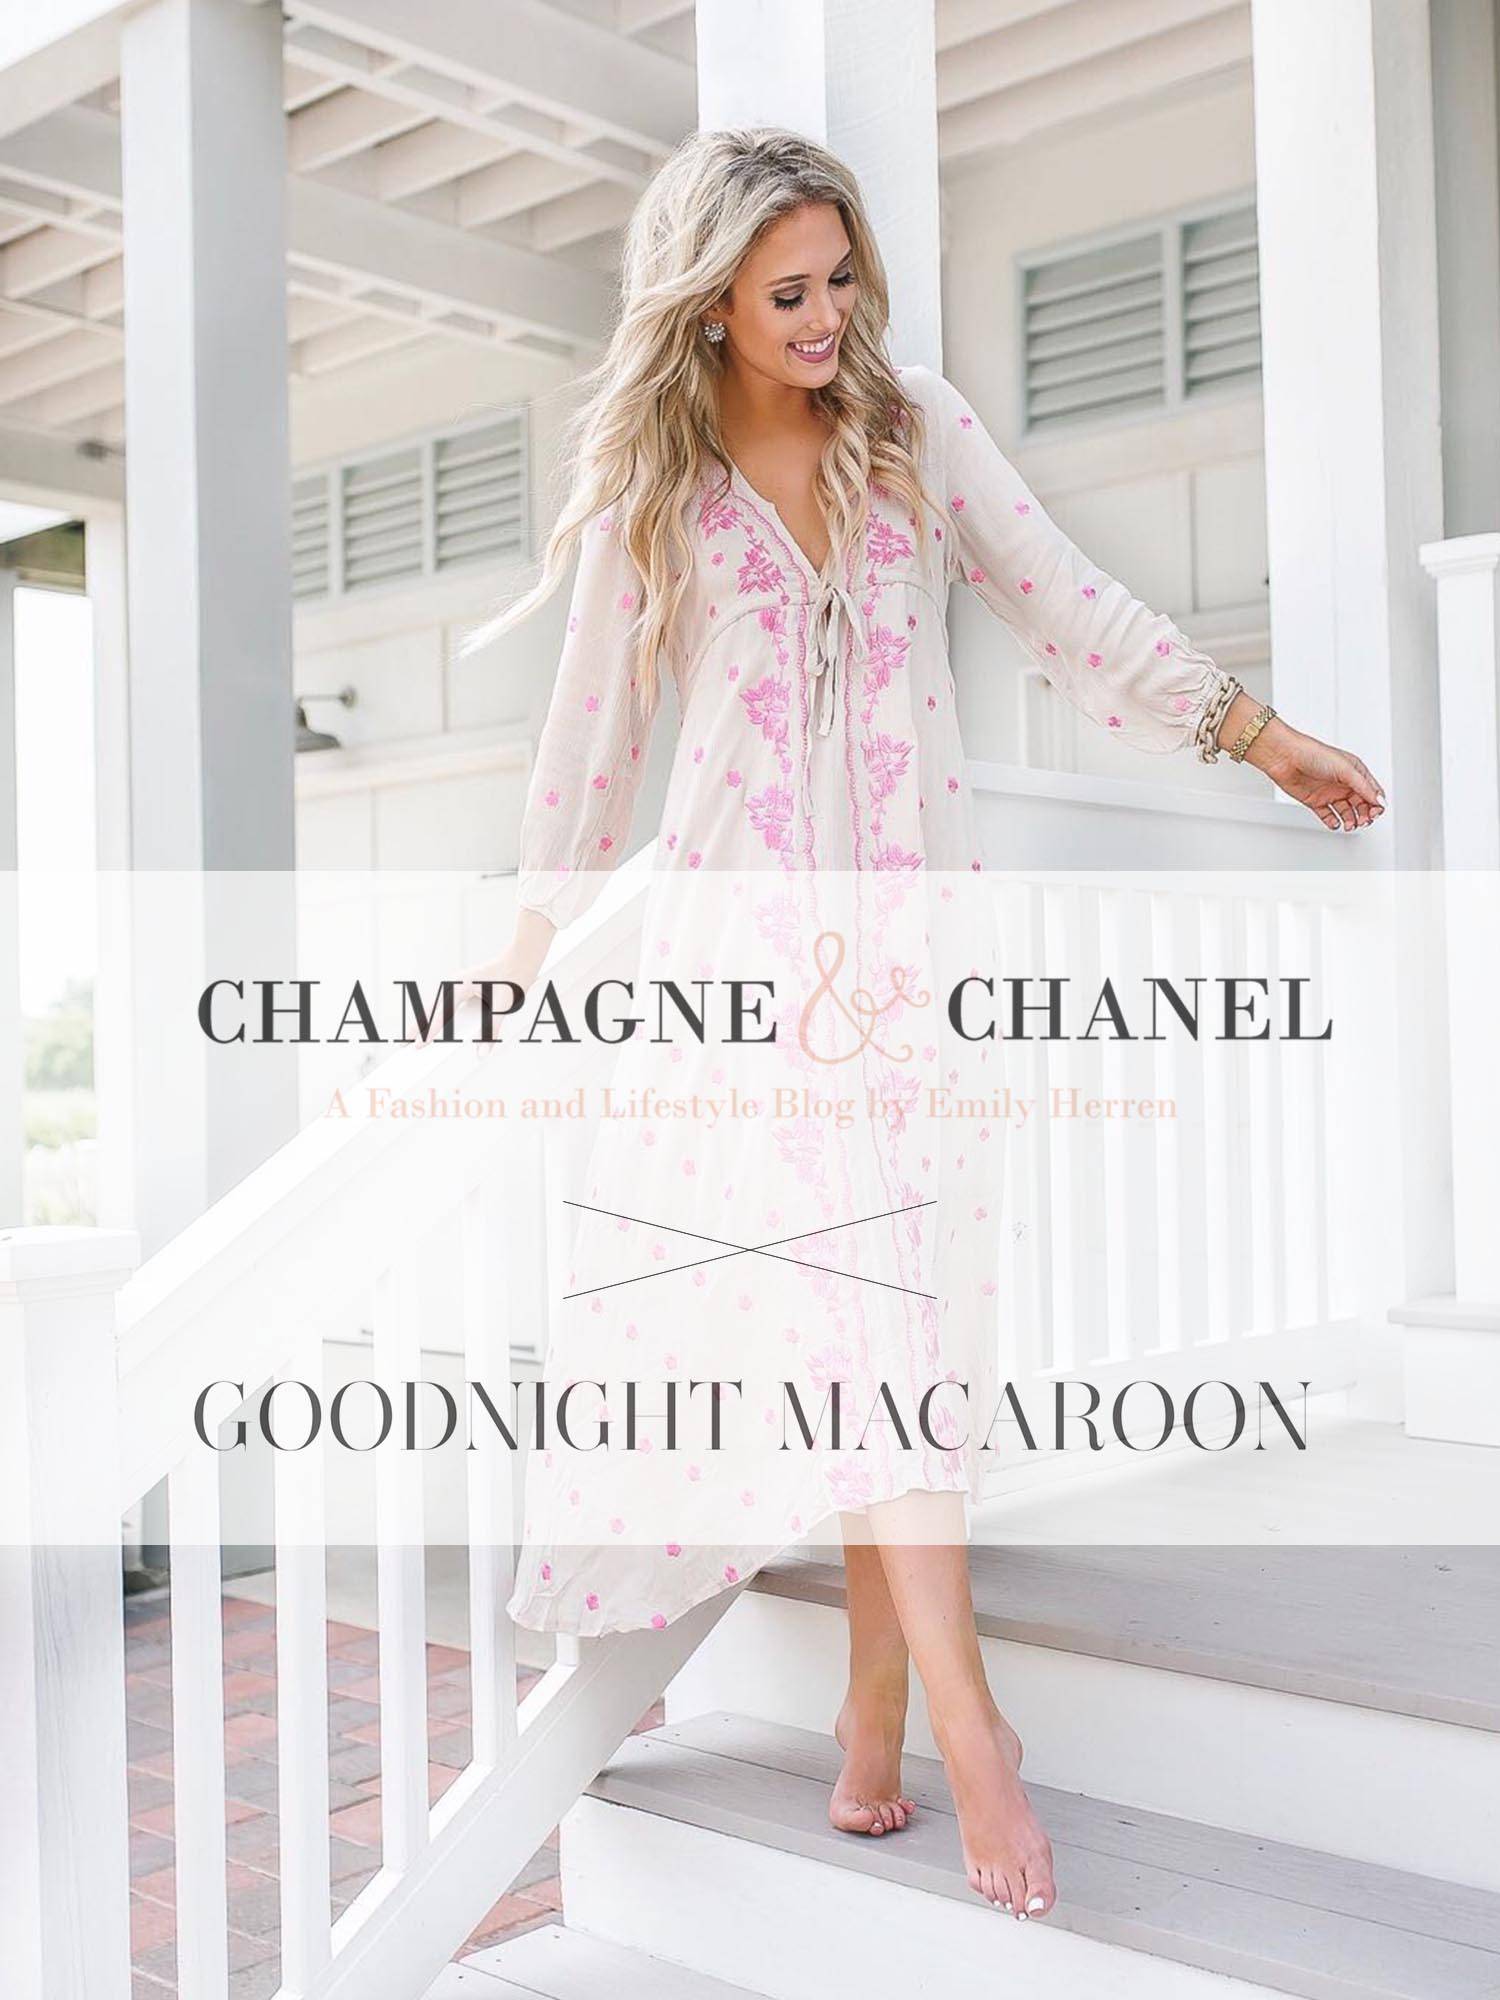 CHAMPAGNE & CHANEL SUMMER COLLECTION – Goodnight Macaroon